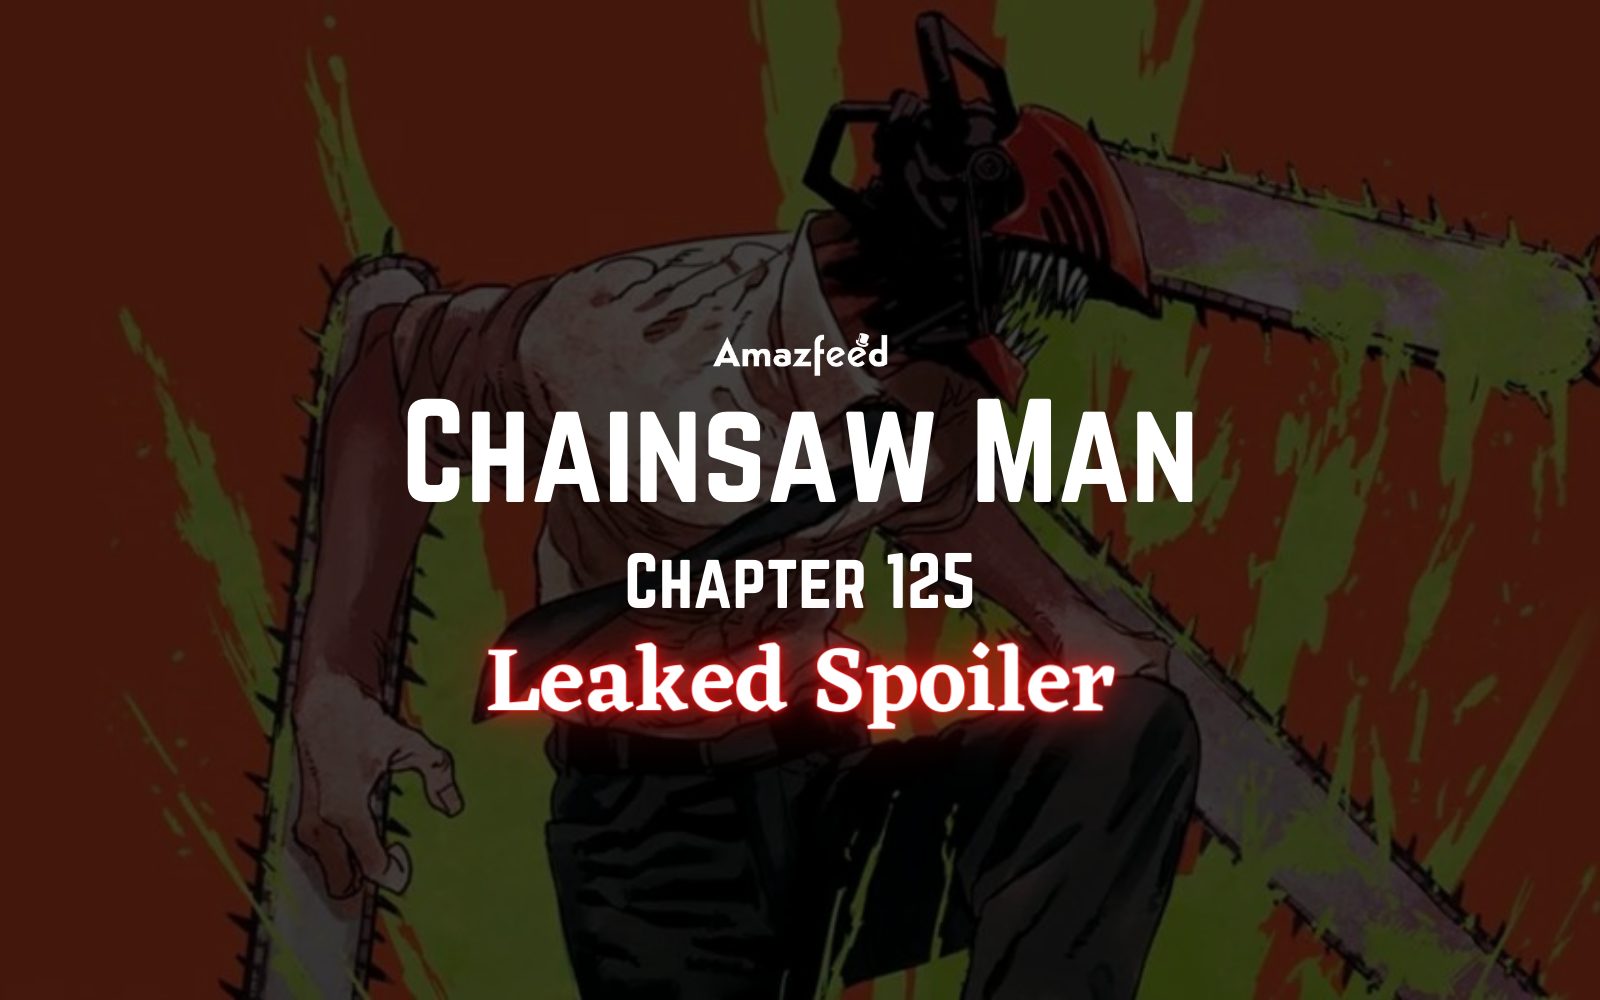 Chainsaw Man chapter 125: Release date and time, countdown, what to expect,  and more